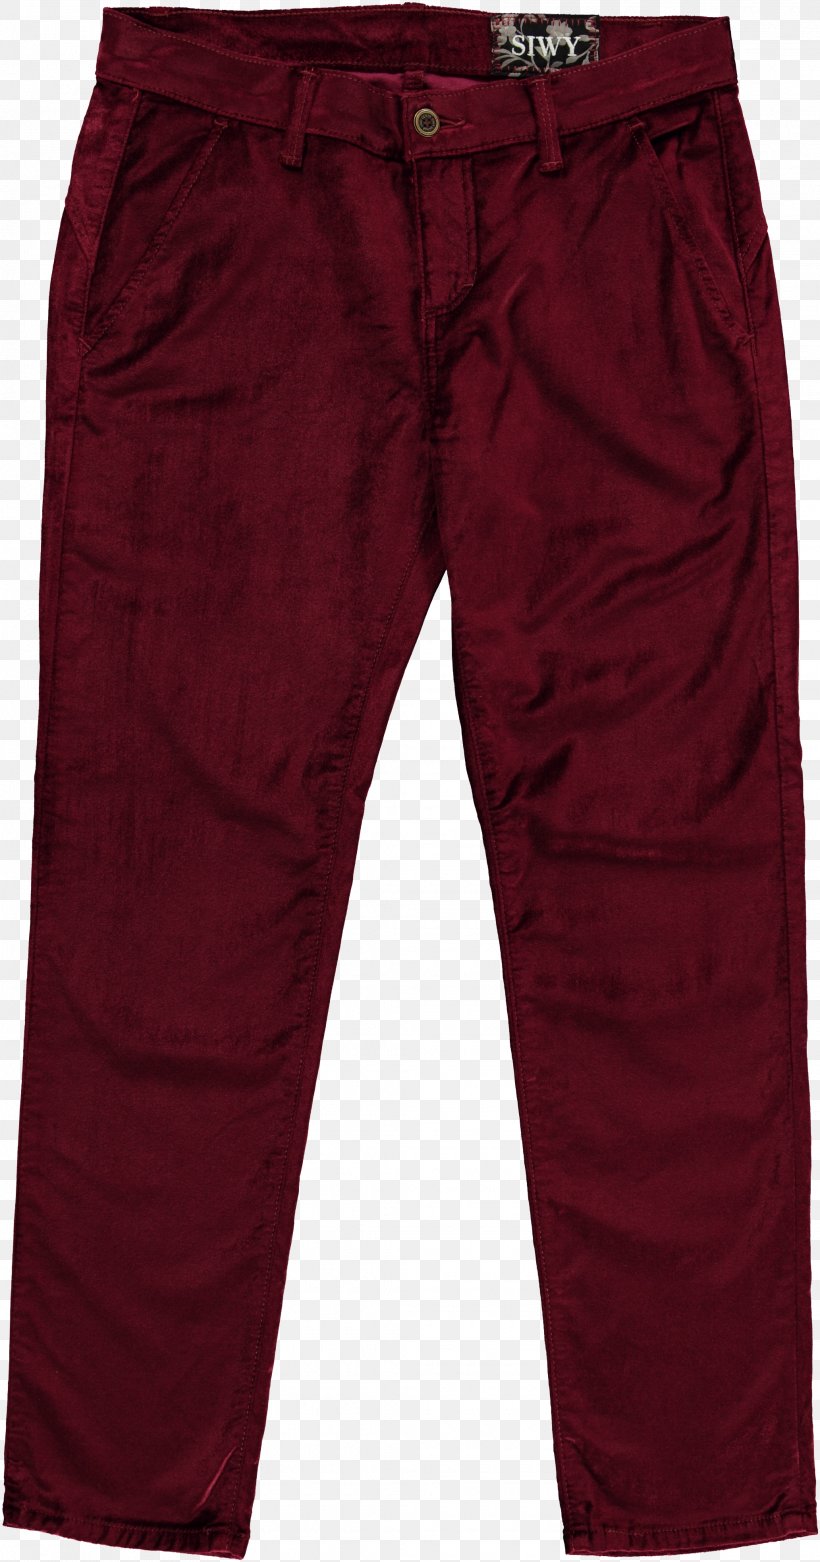 Maroon Jeans Pants, PNG, 2065x3935px, Maroon, Active Pants, Jeans, Pants, Trousers Download Free